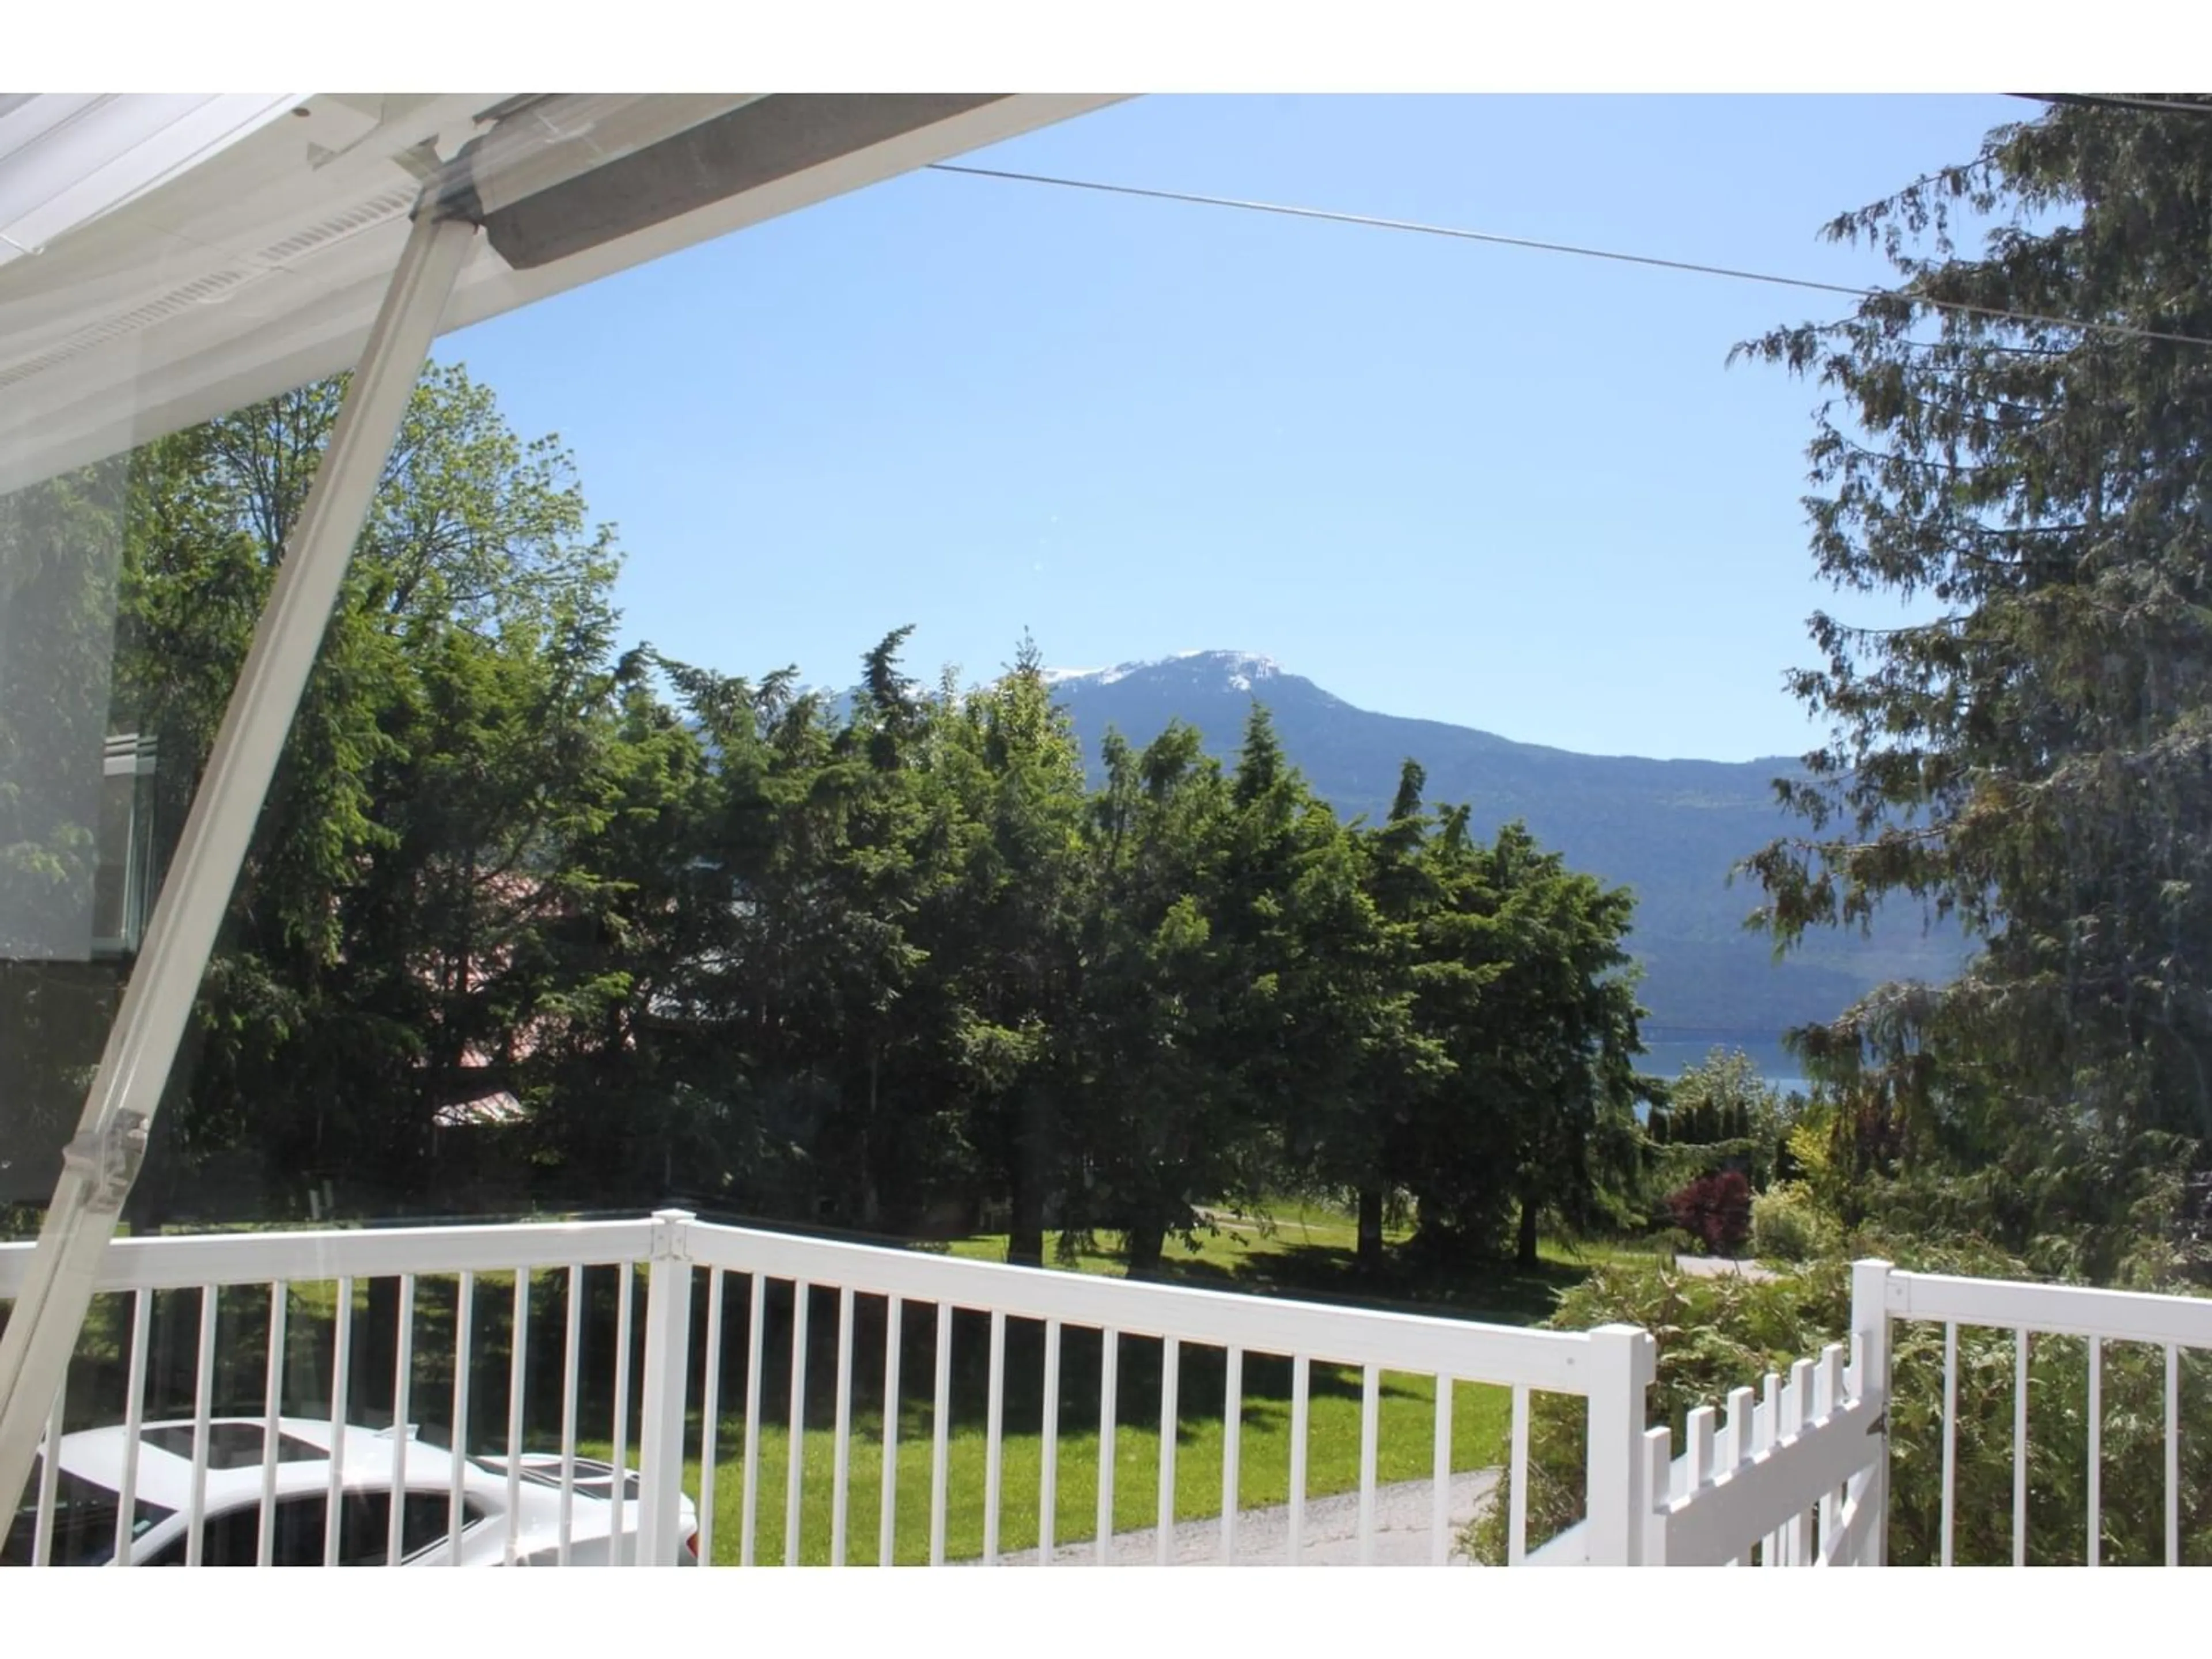 A pic from exterior of the house or condo for 270 GLENACRES ROAD, Nakusp British Columbia V0G1R0